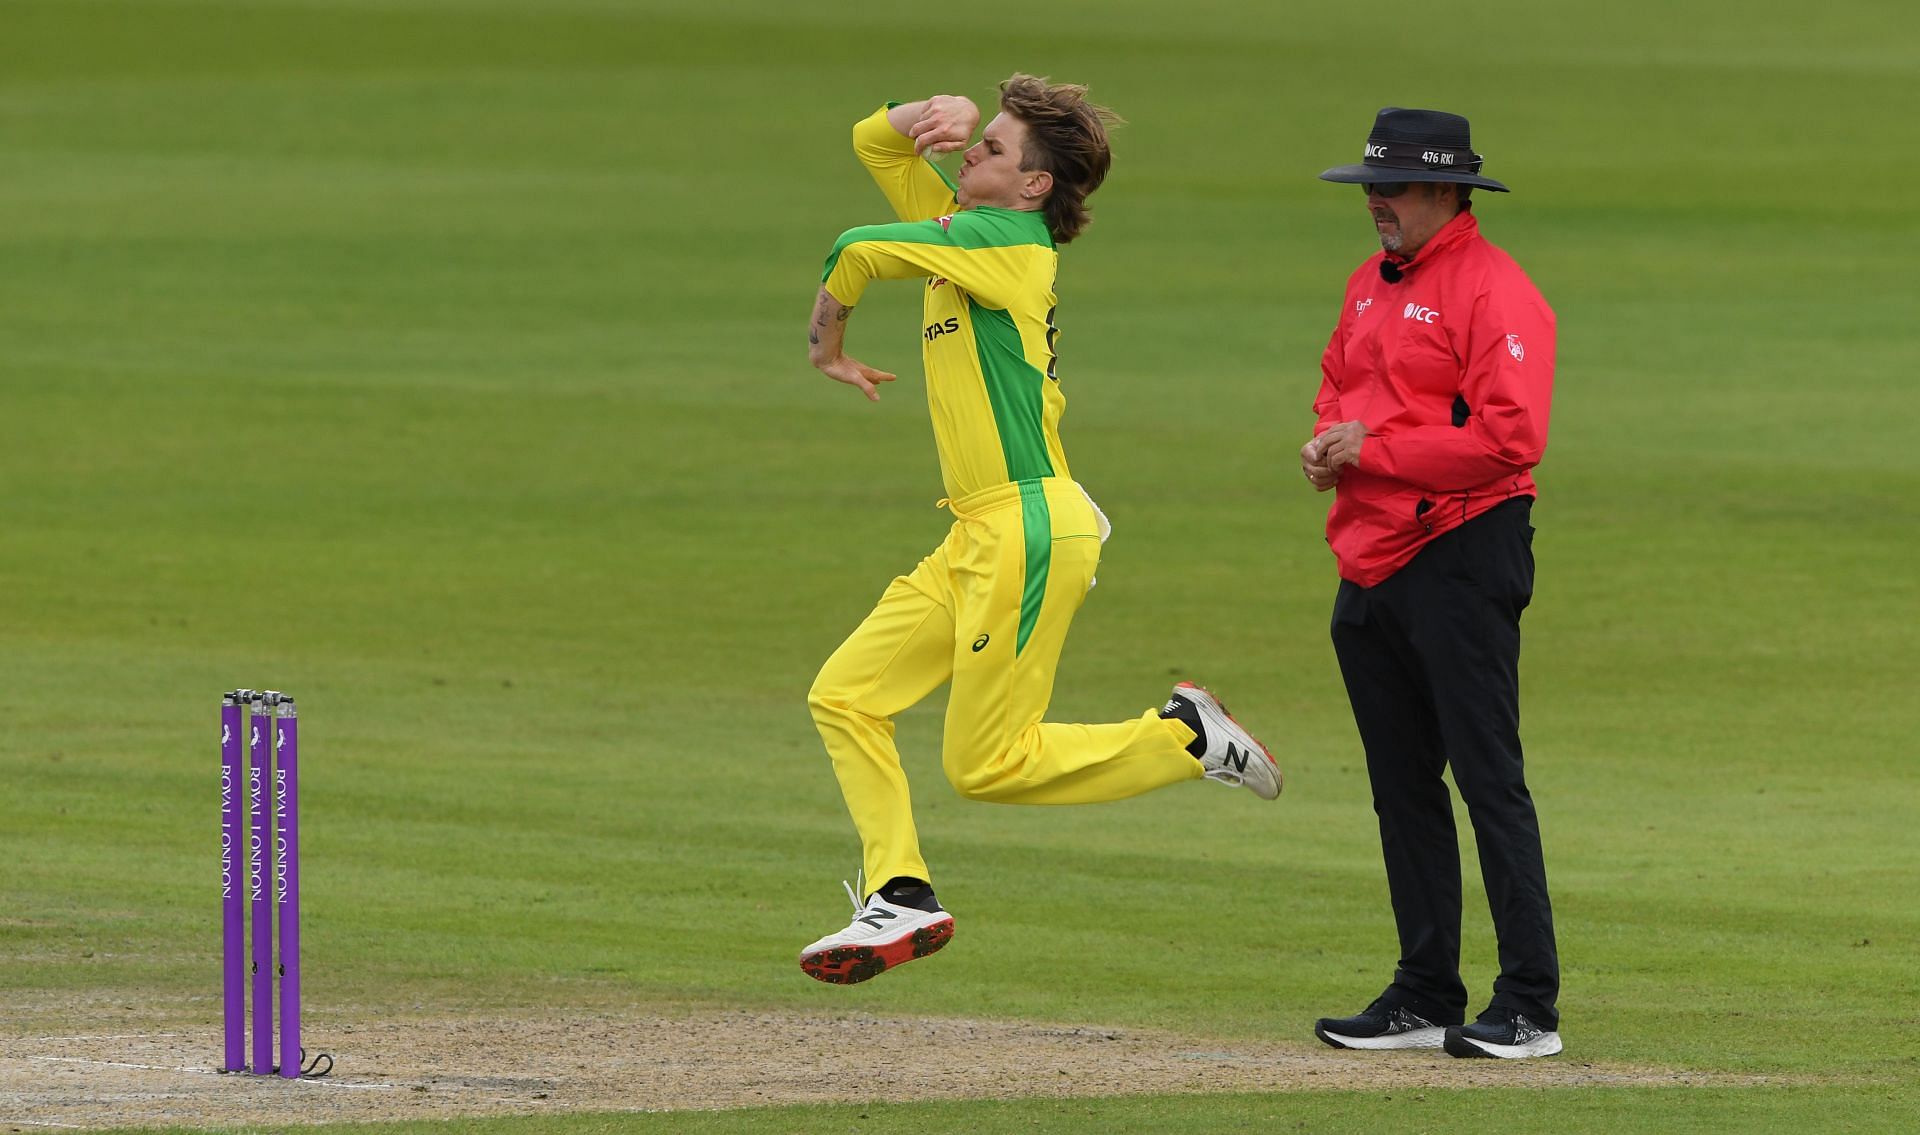 Adam Zampa could prove key when Australia take on New Zealand in the T20 World Cup final.